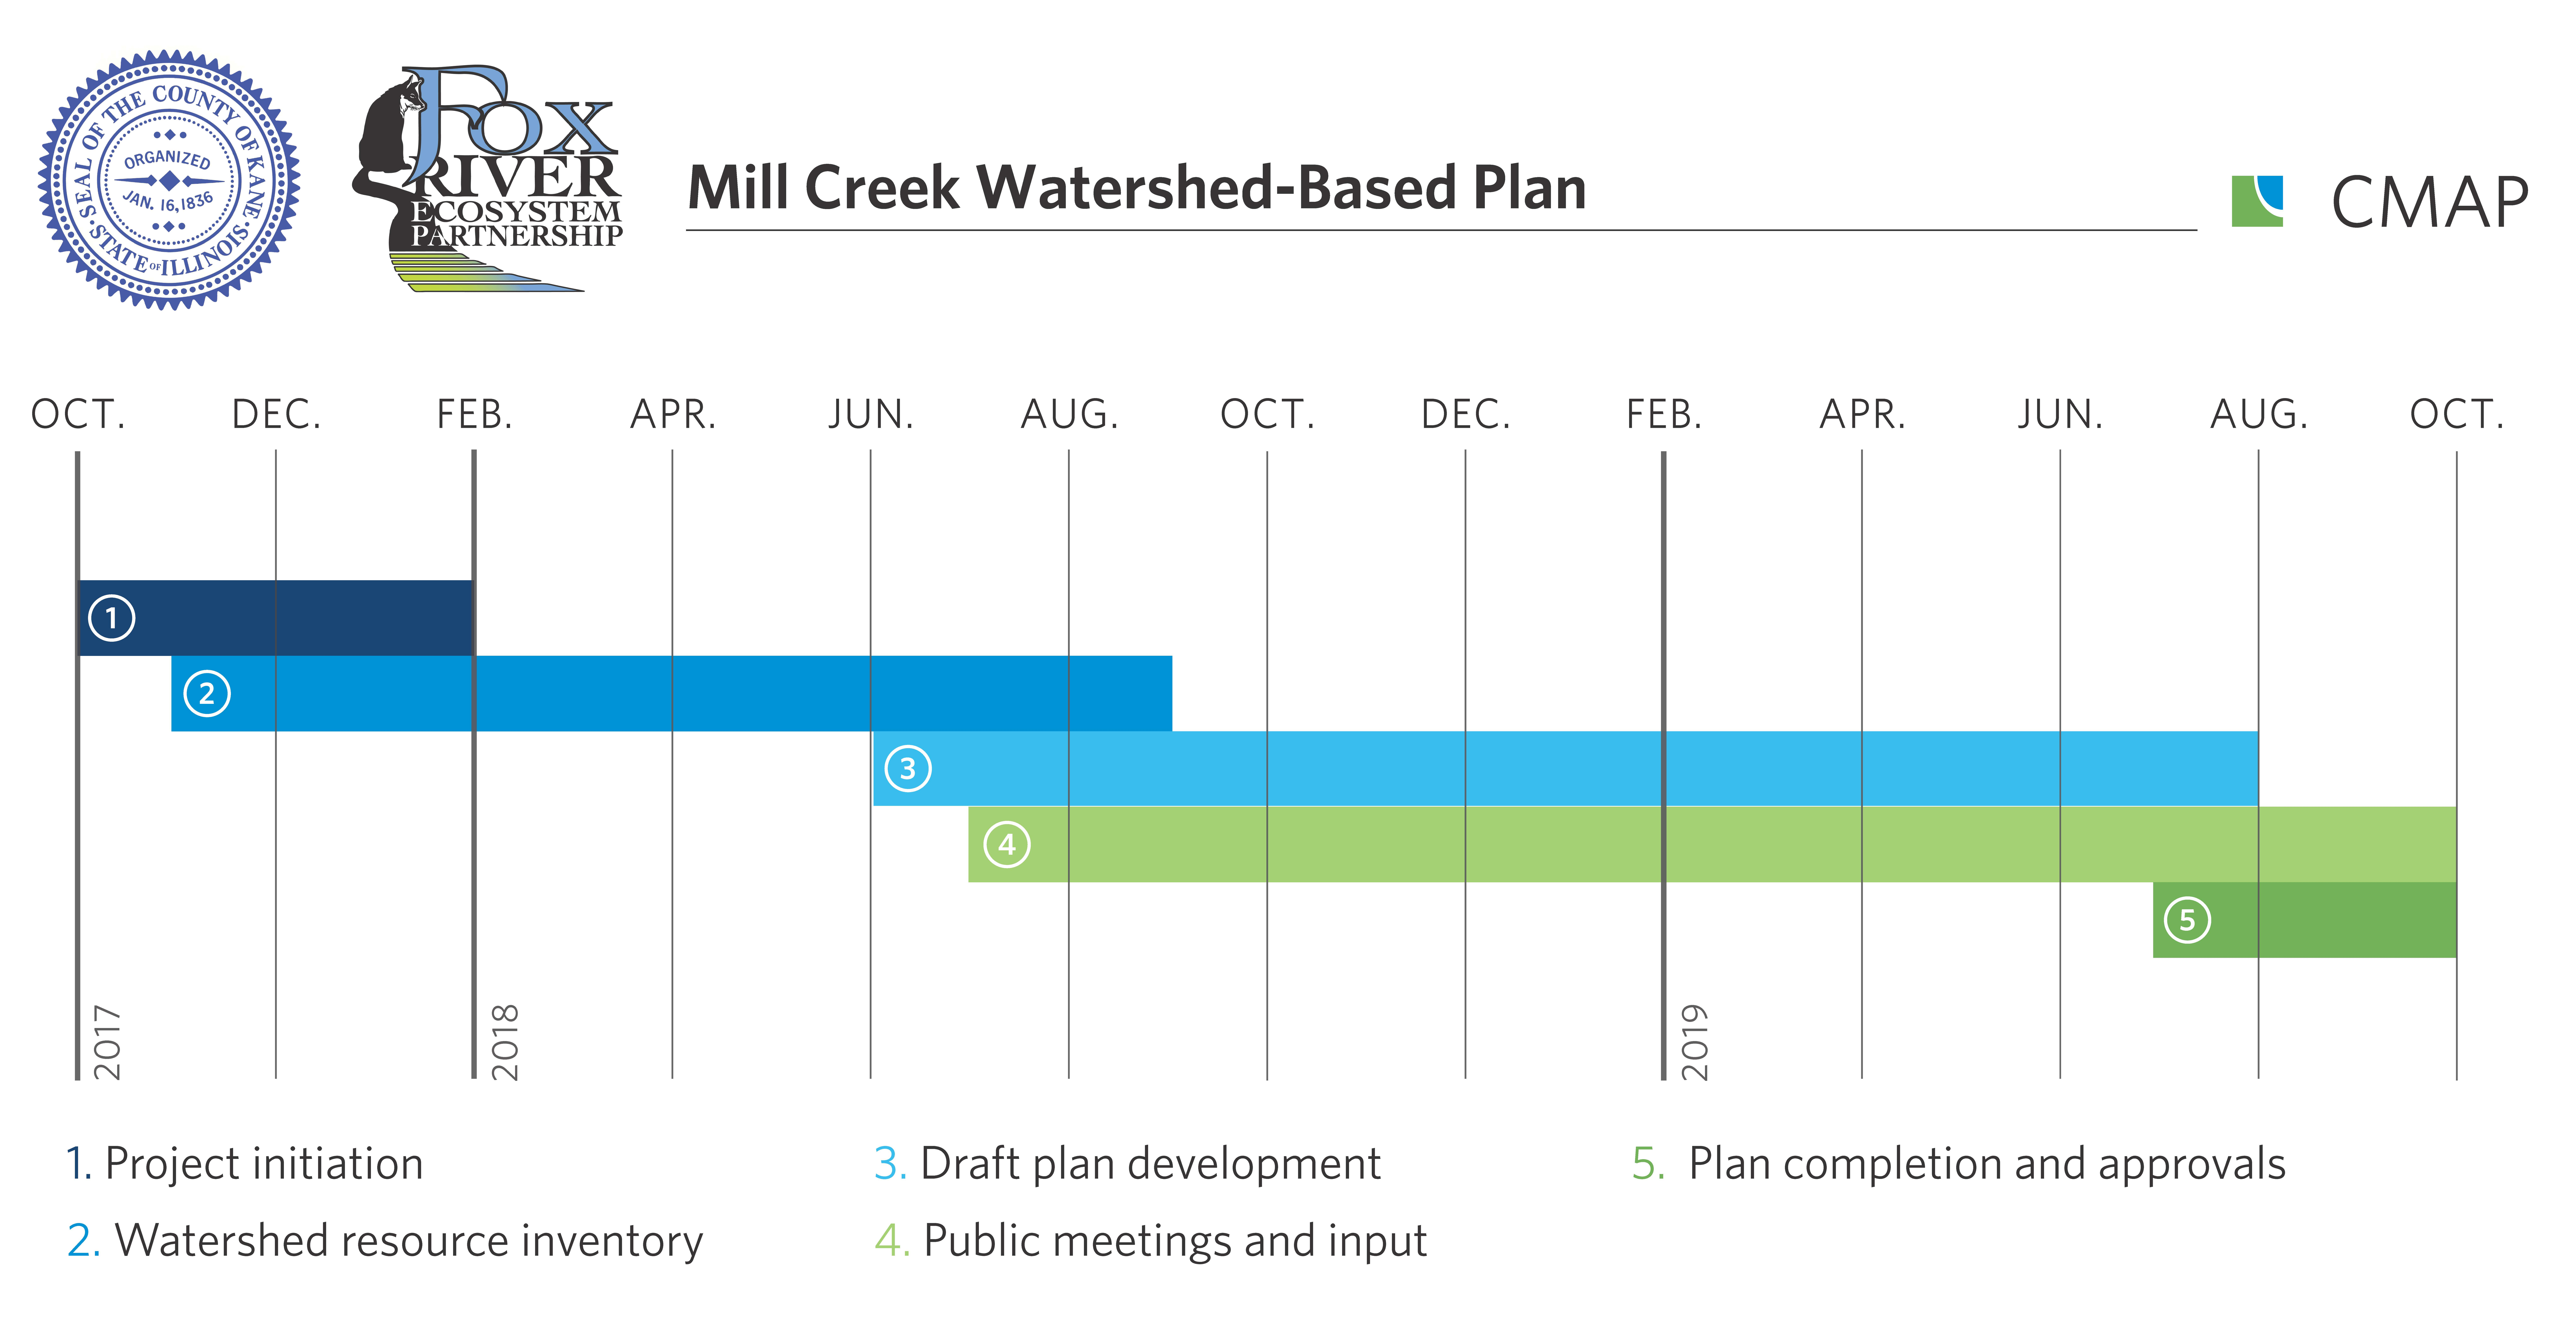 Mill Creek Watershed-based Plan project timeline